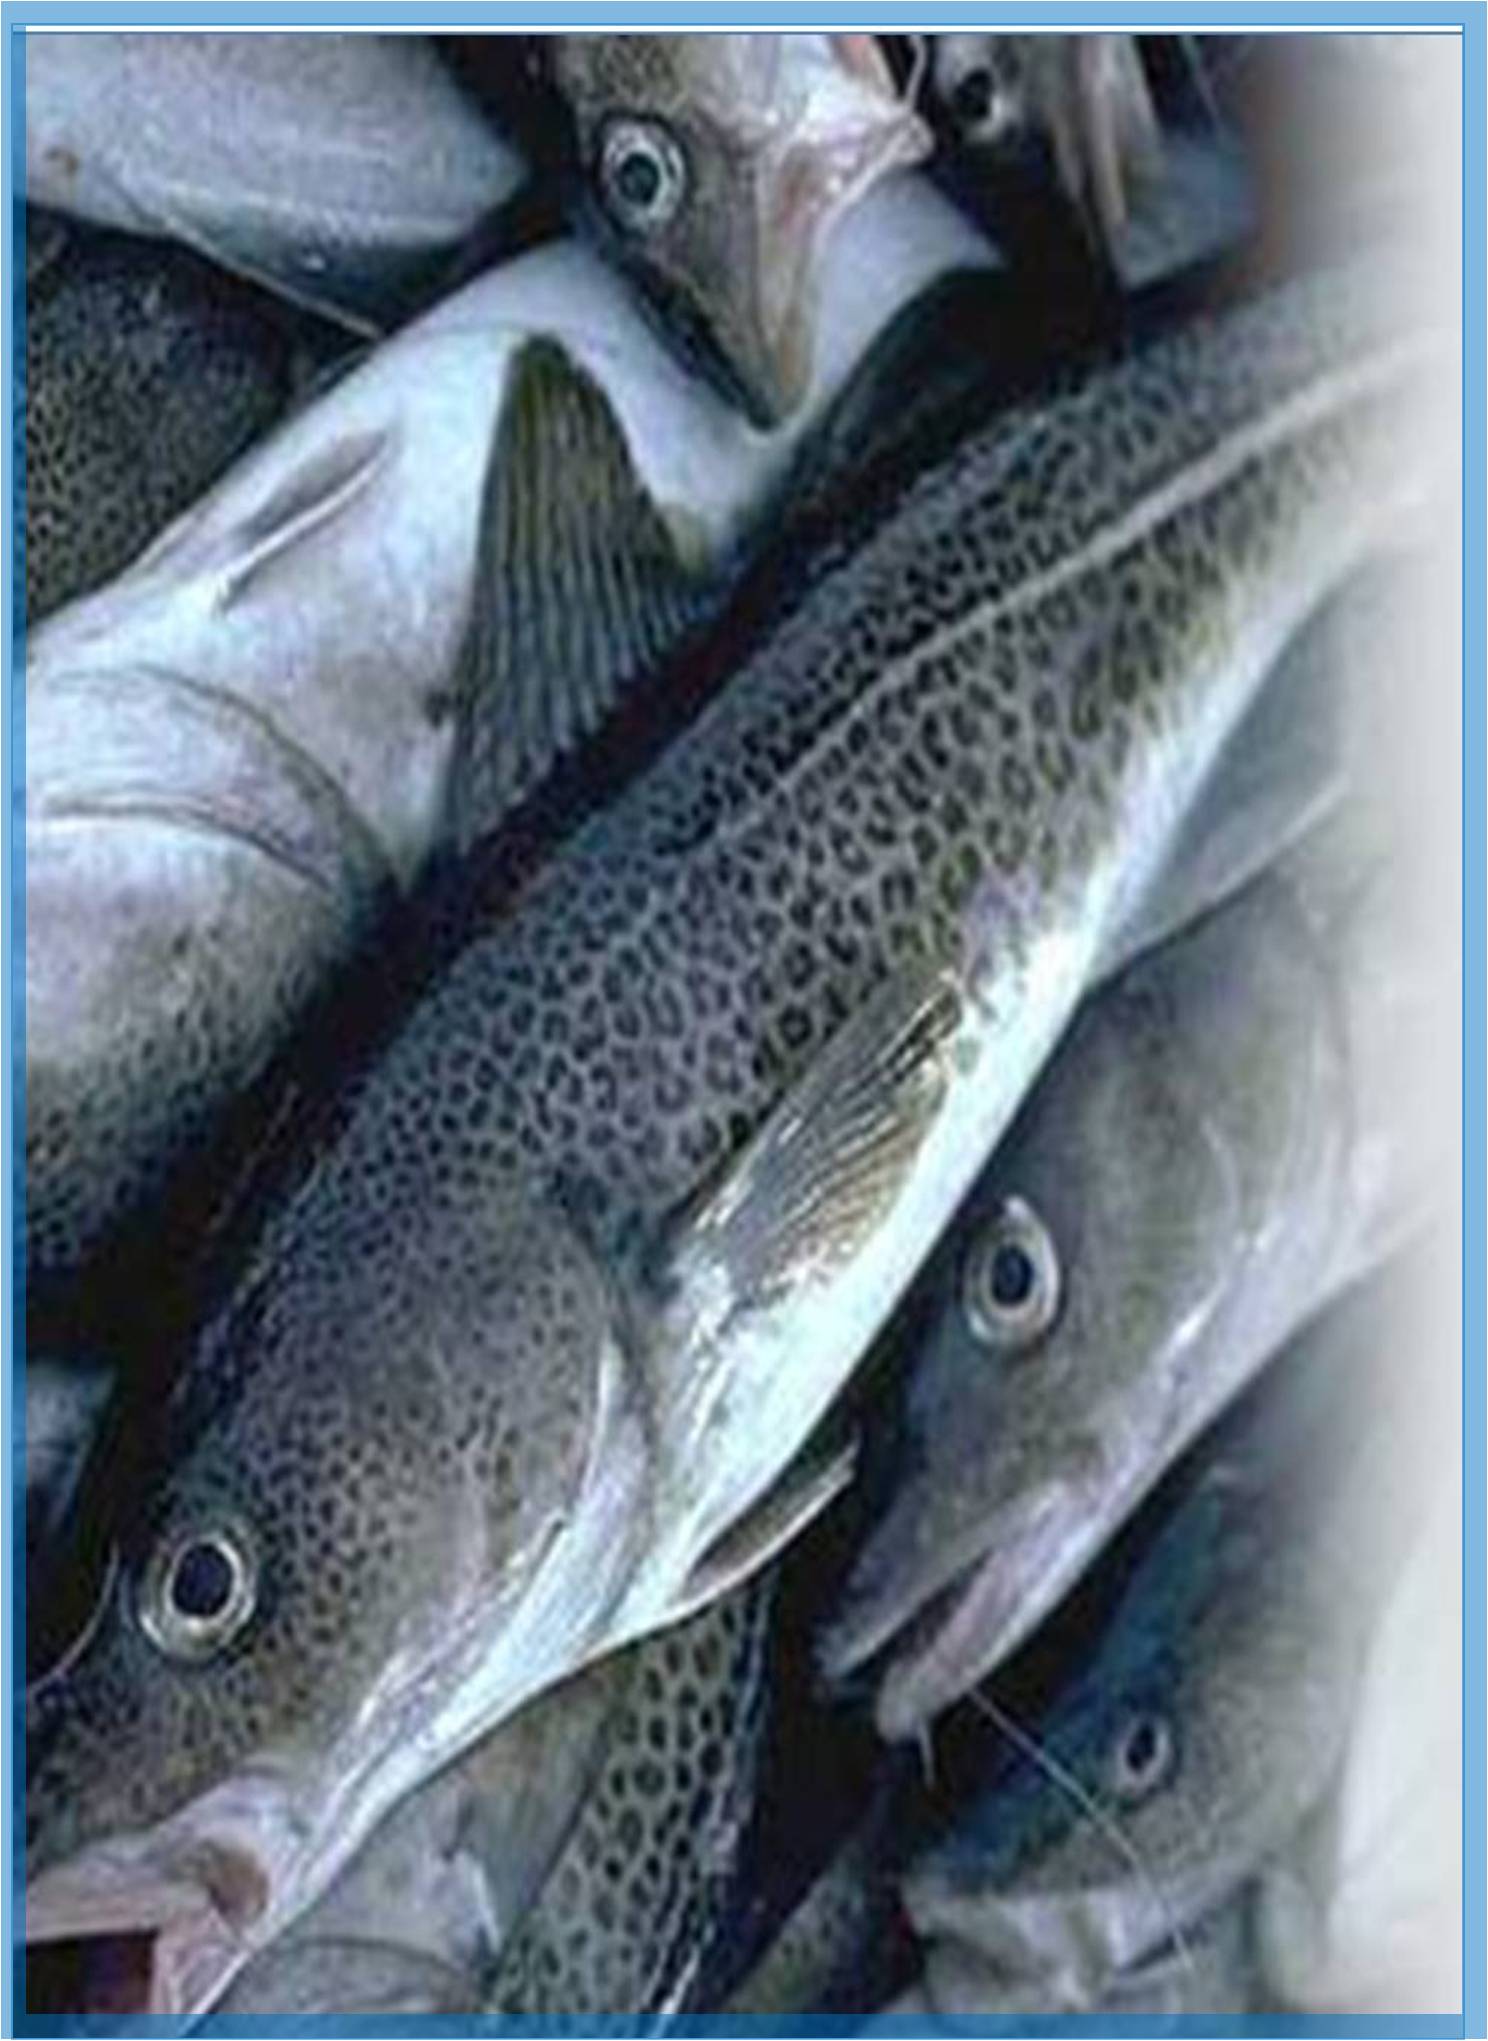 global-journal-of-fisheries-and-aquaculture-banner.jpg